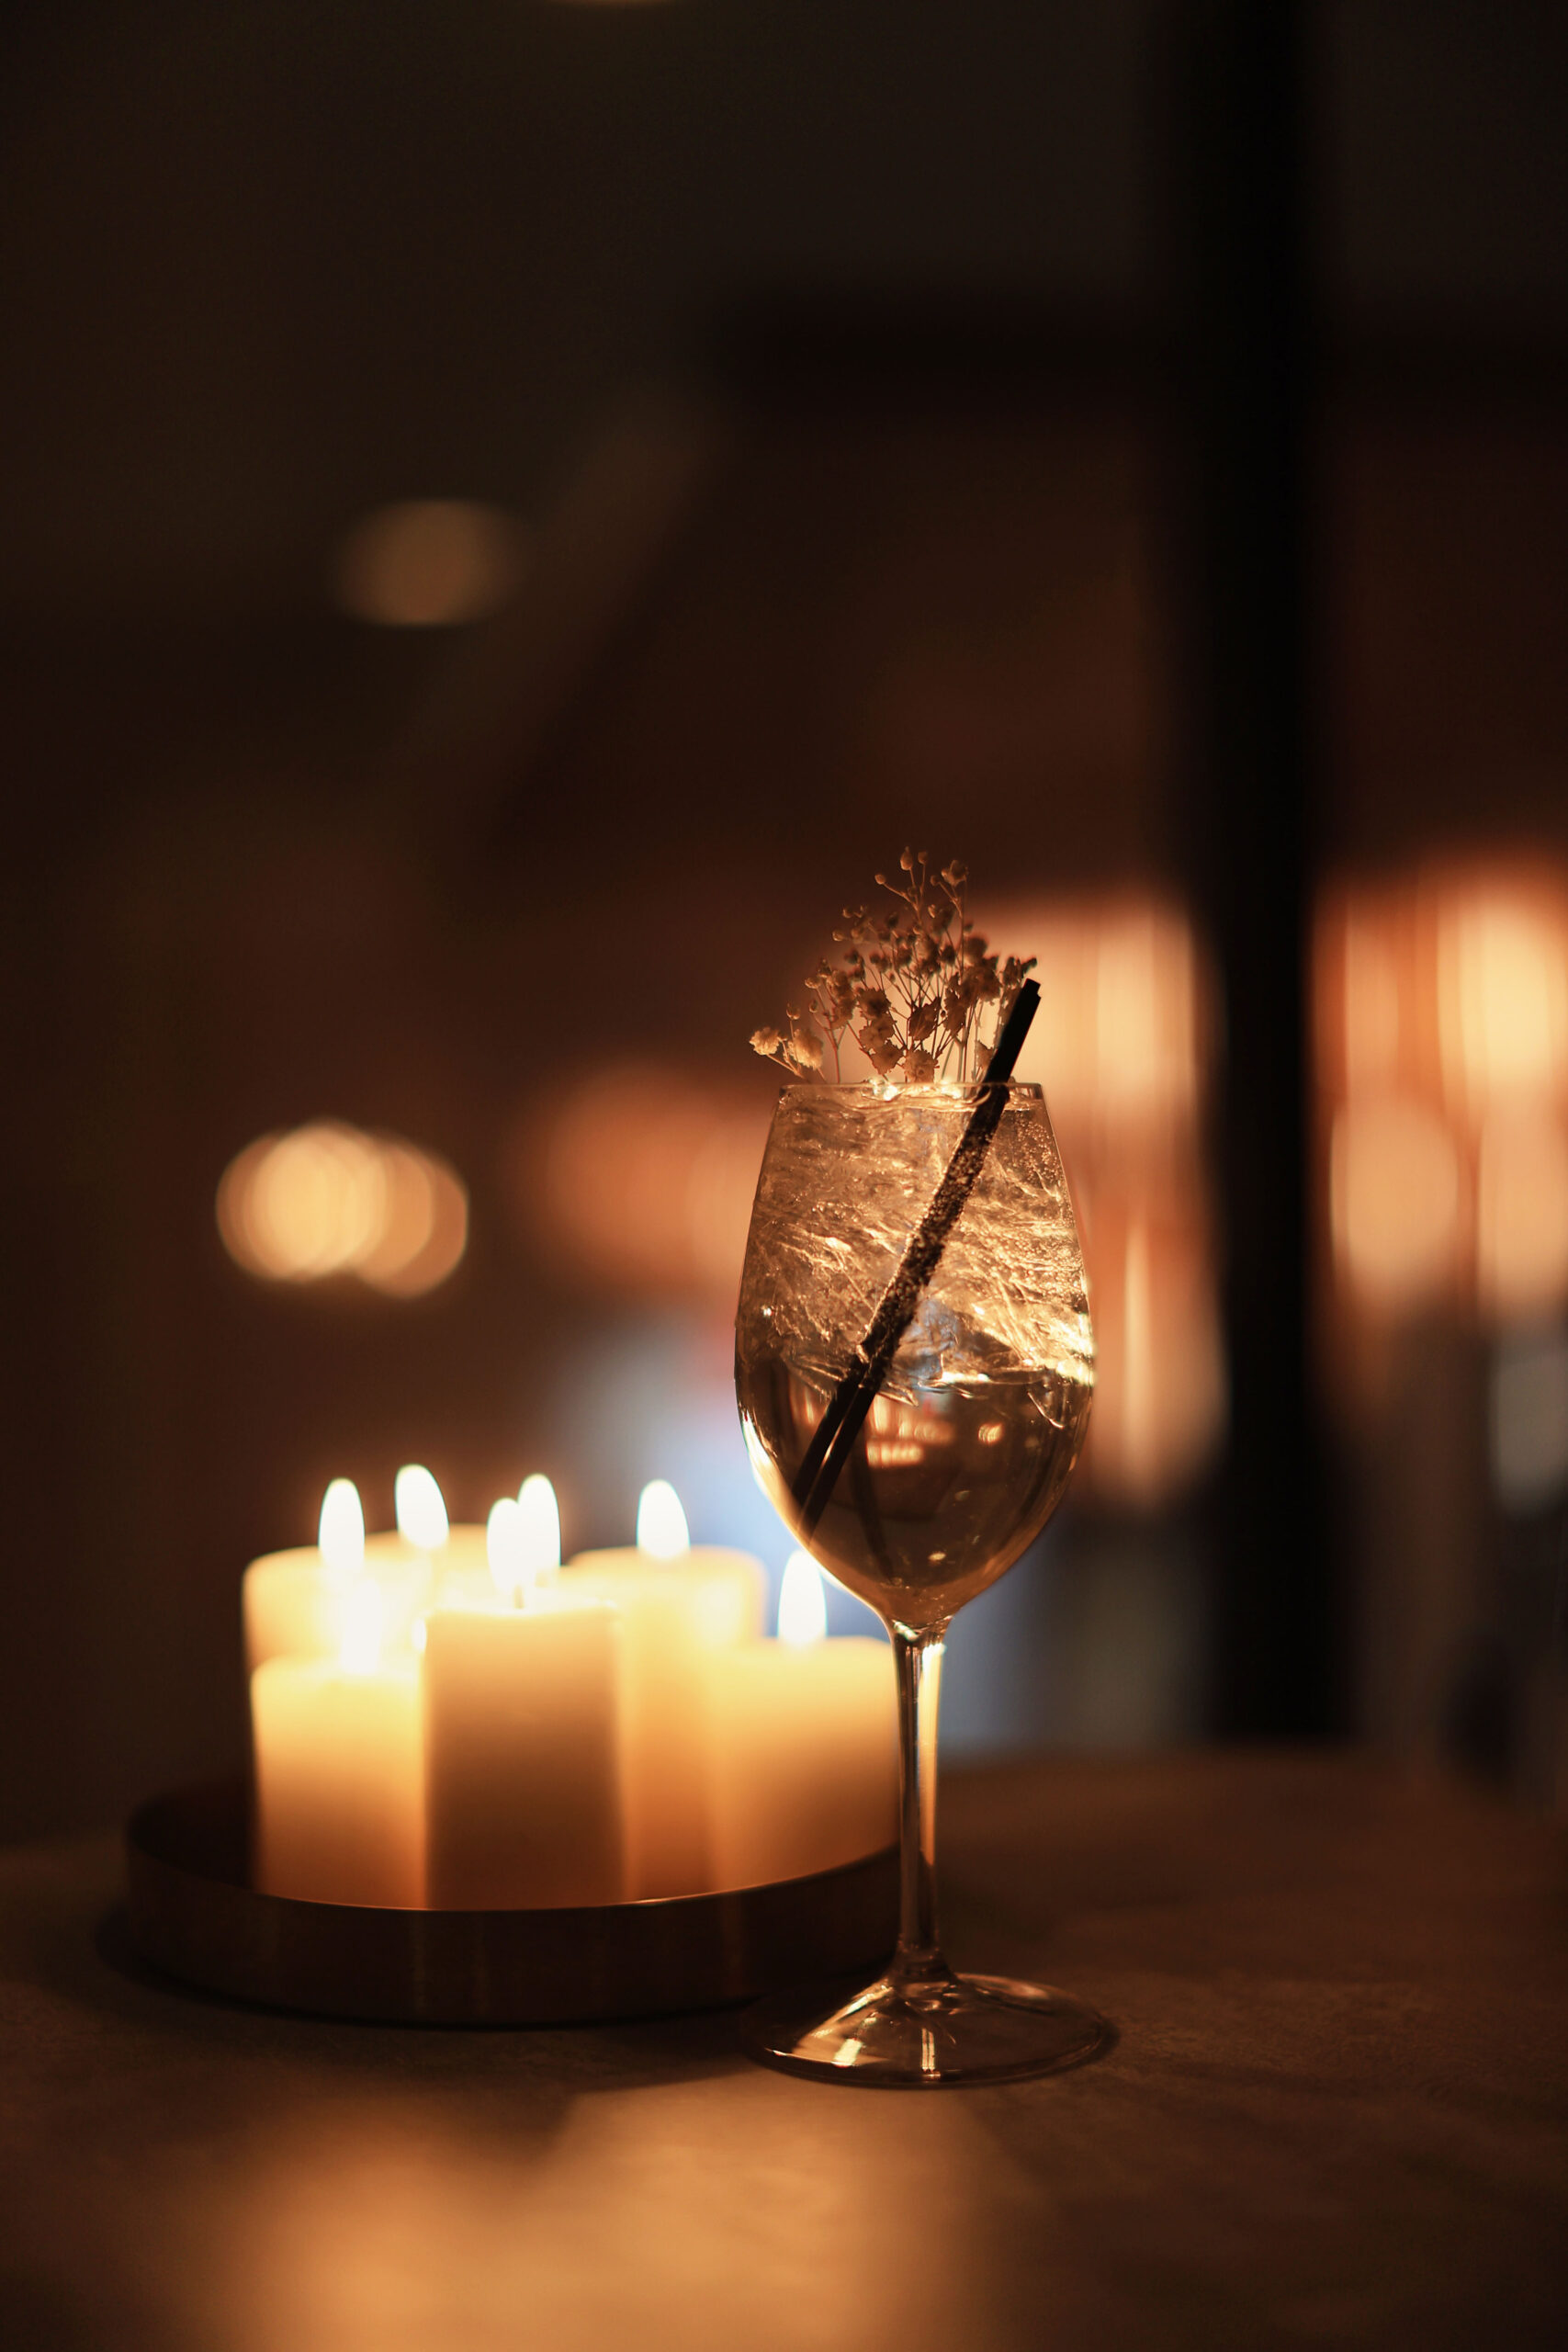 A cocktail with a straw and decorative herbs set next to a tray of lit candles.